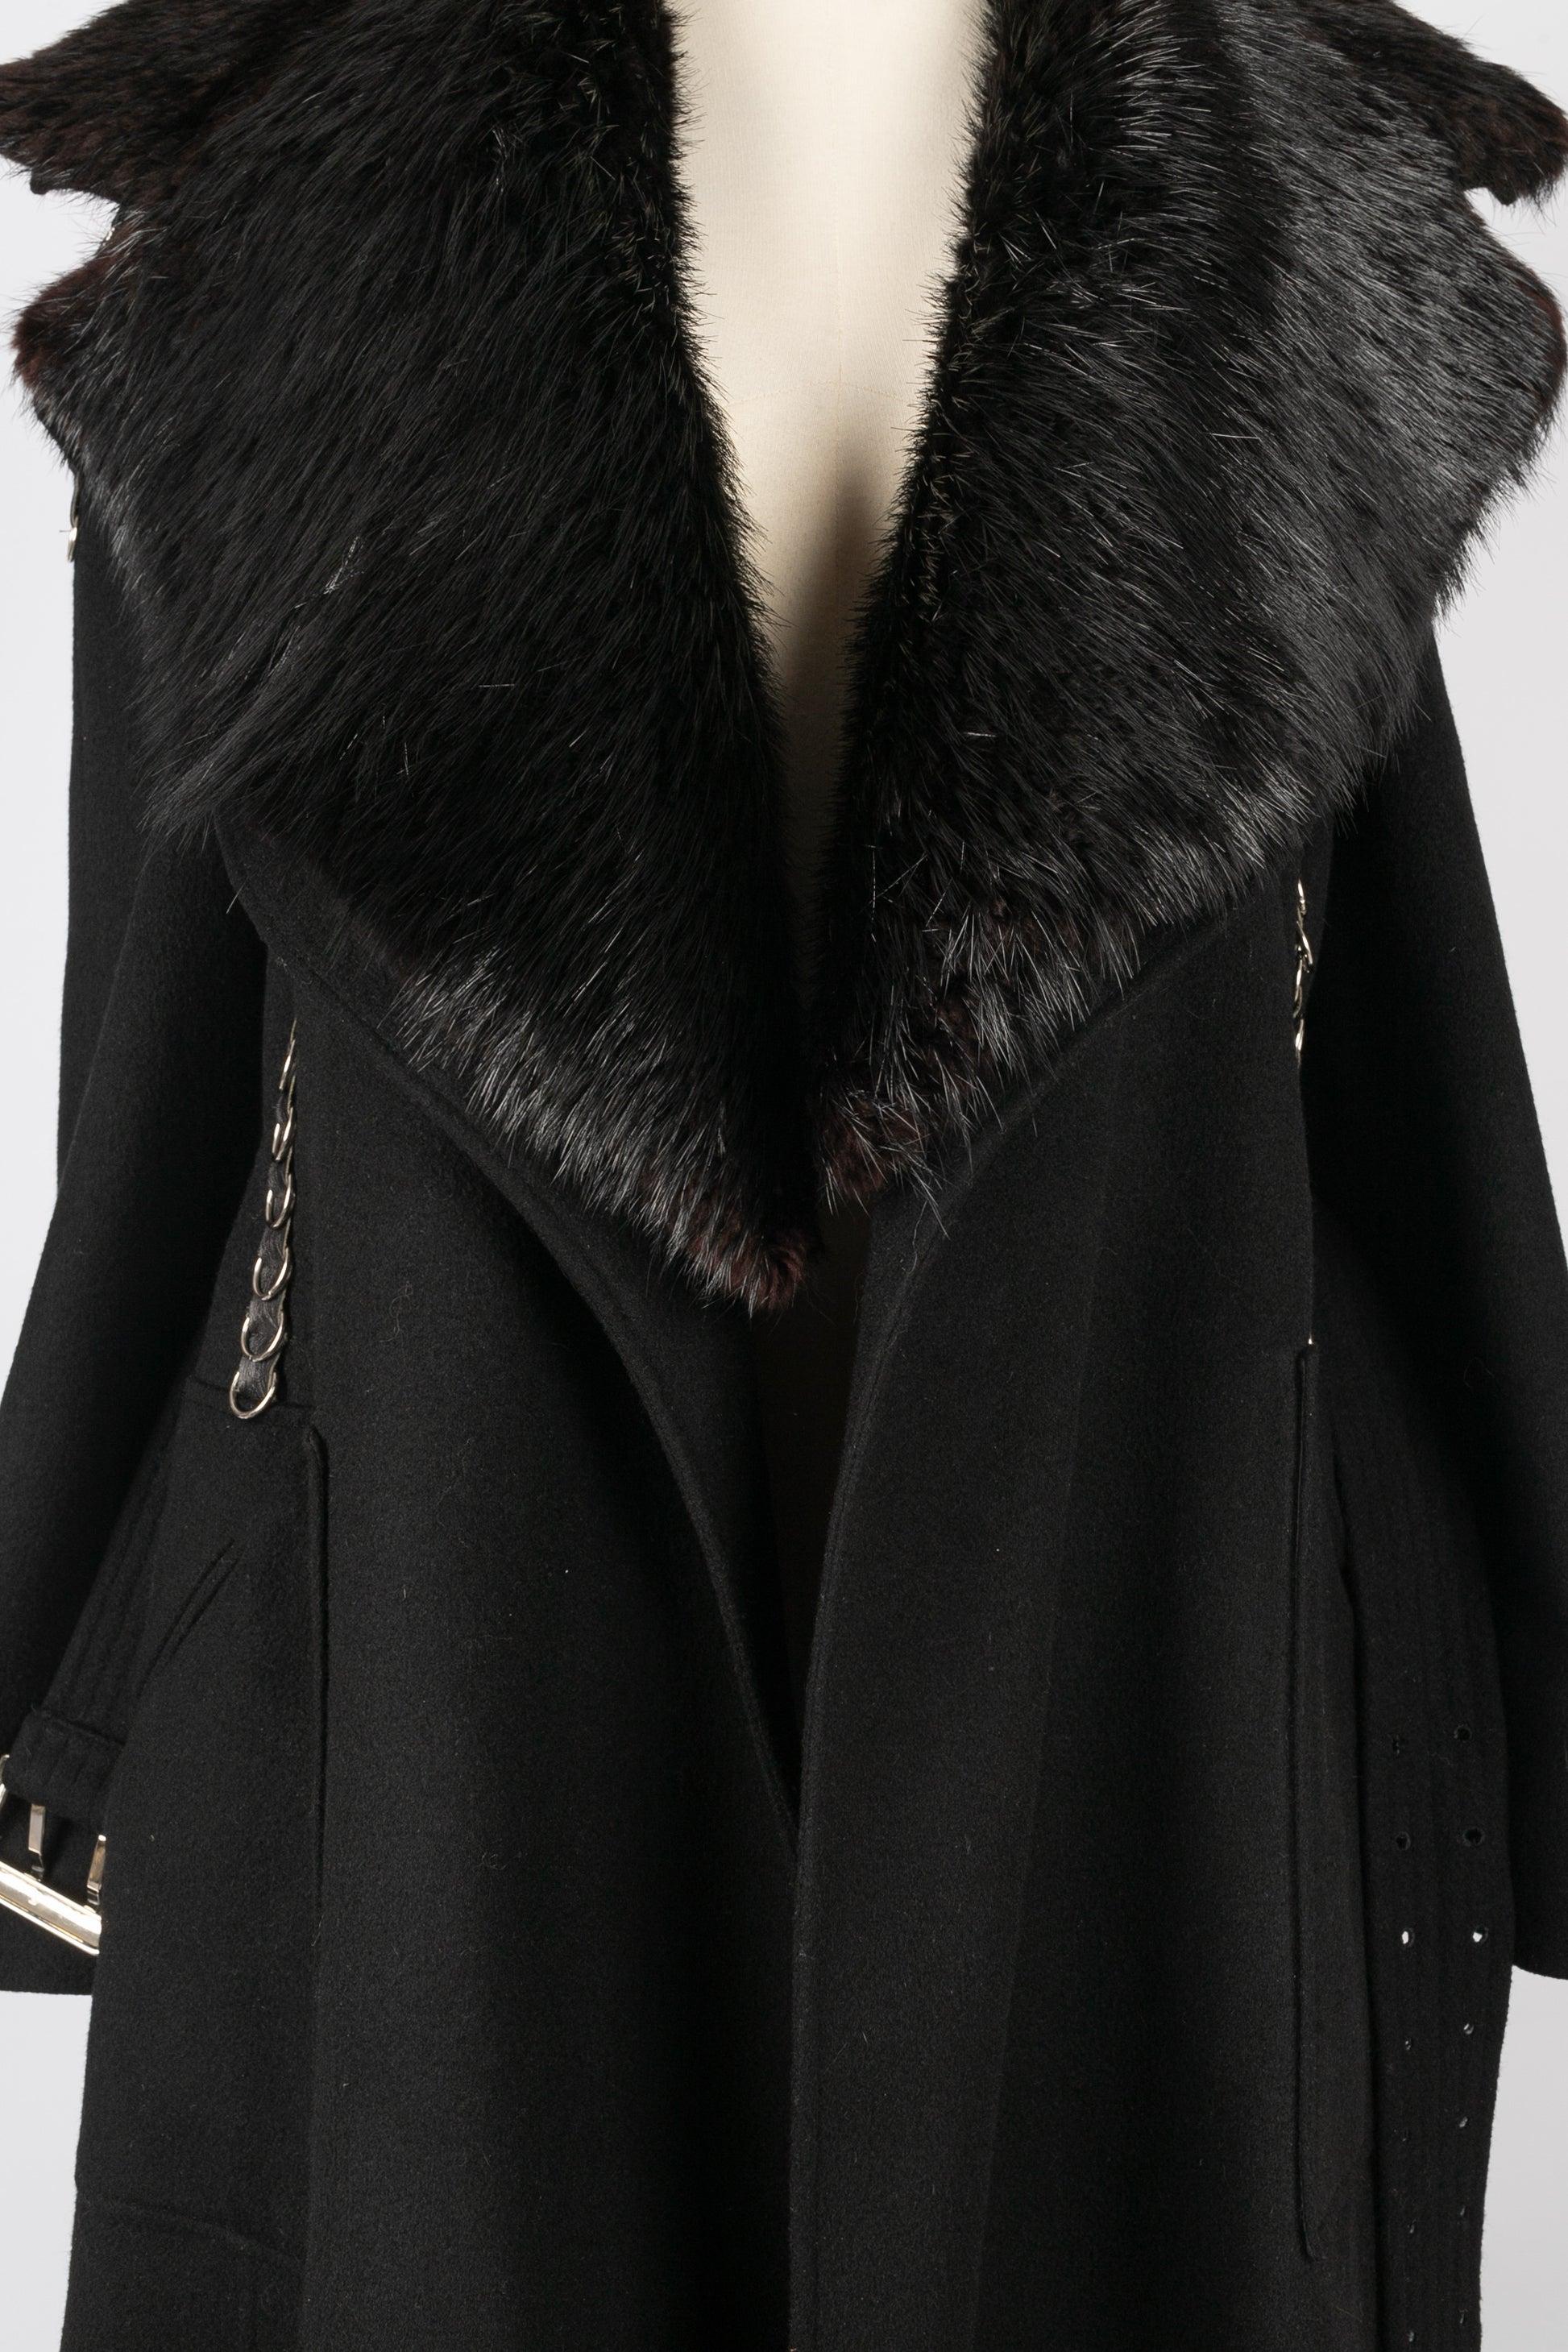 Paco Rabanne Coat Ornamented with Fur Collar For Sale 4